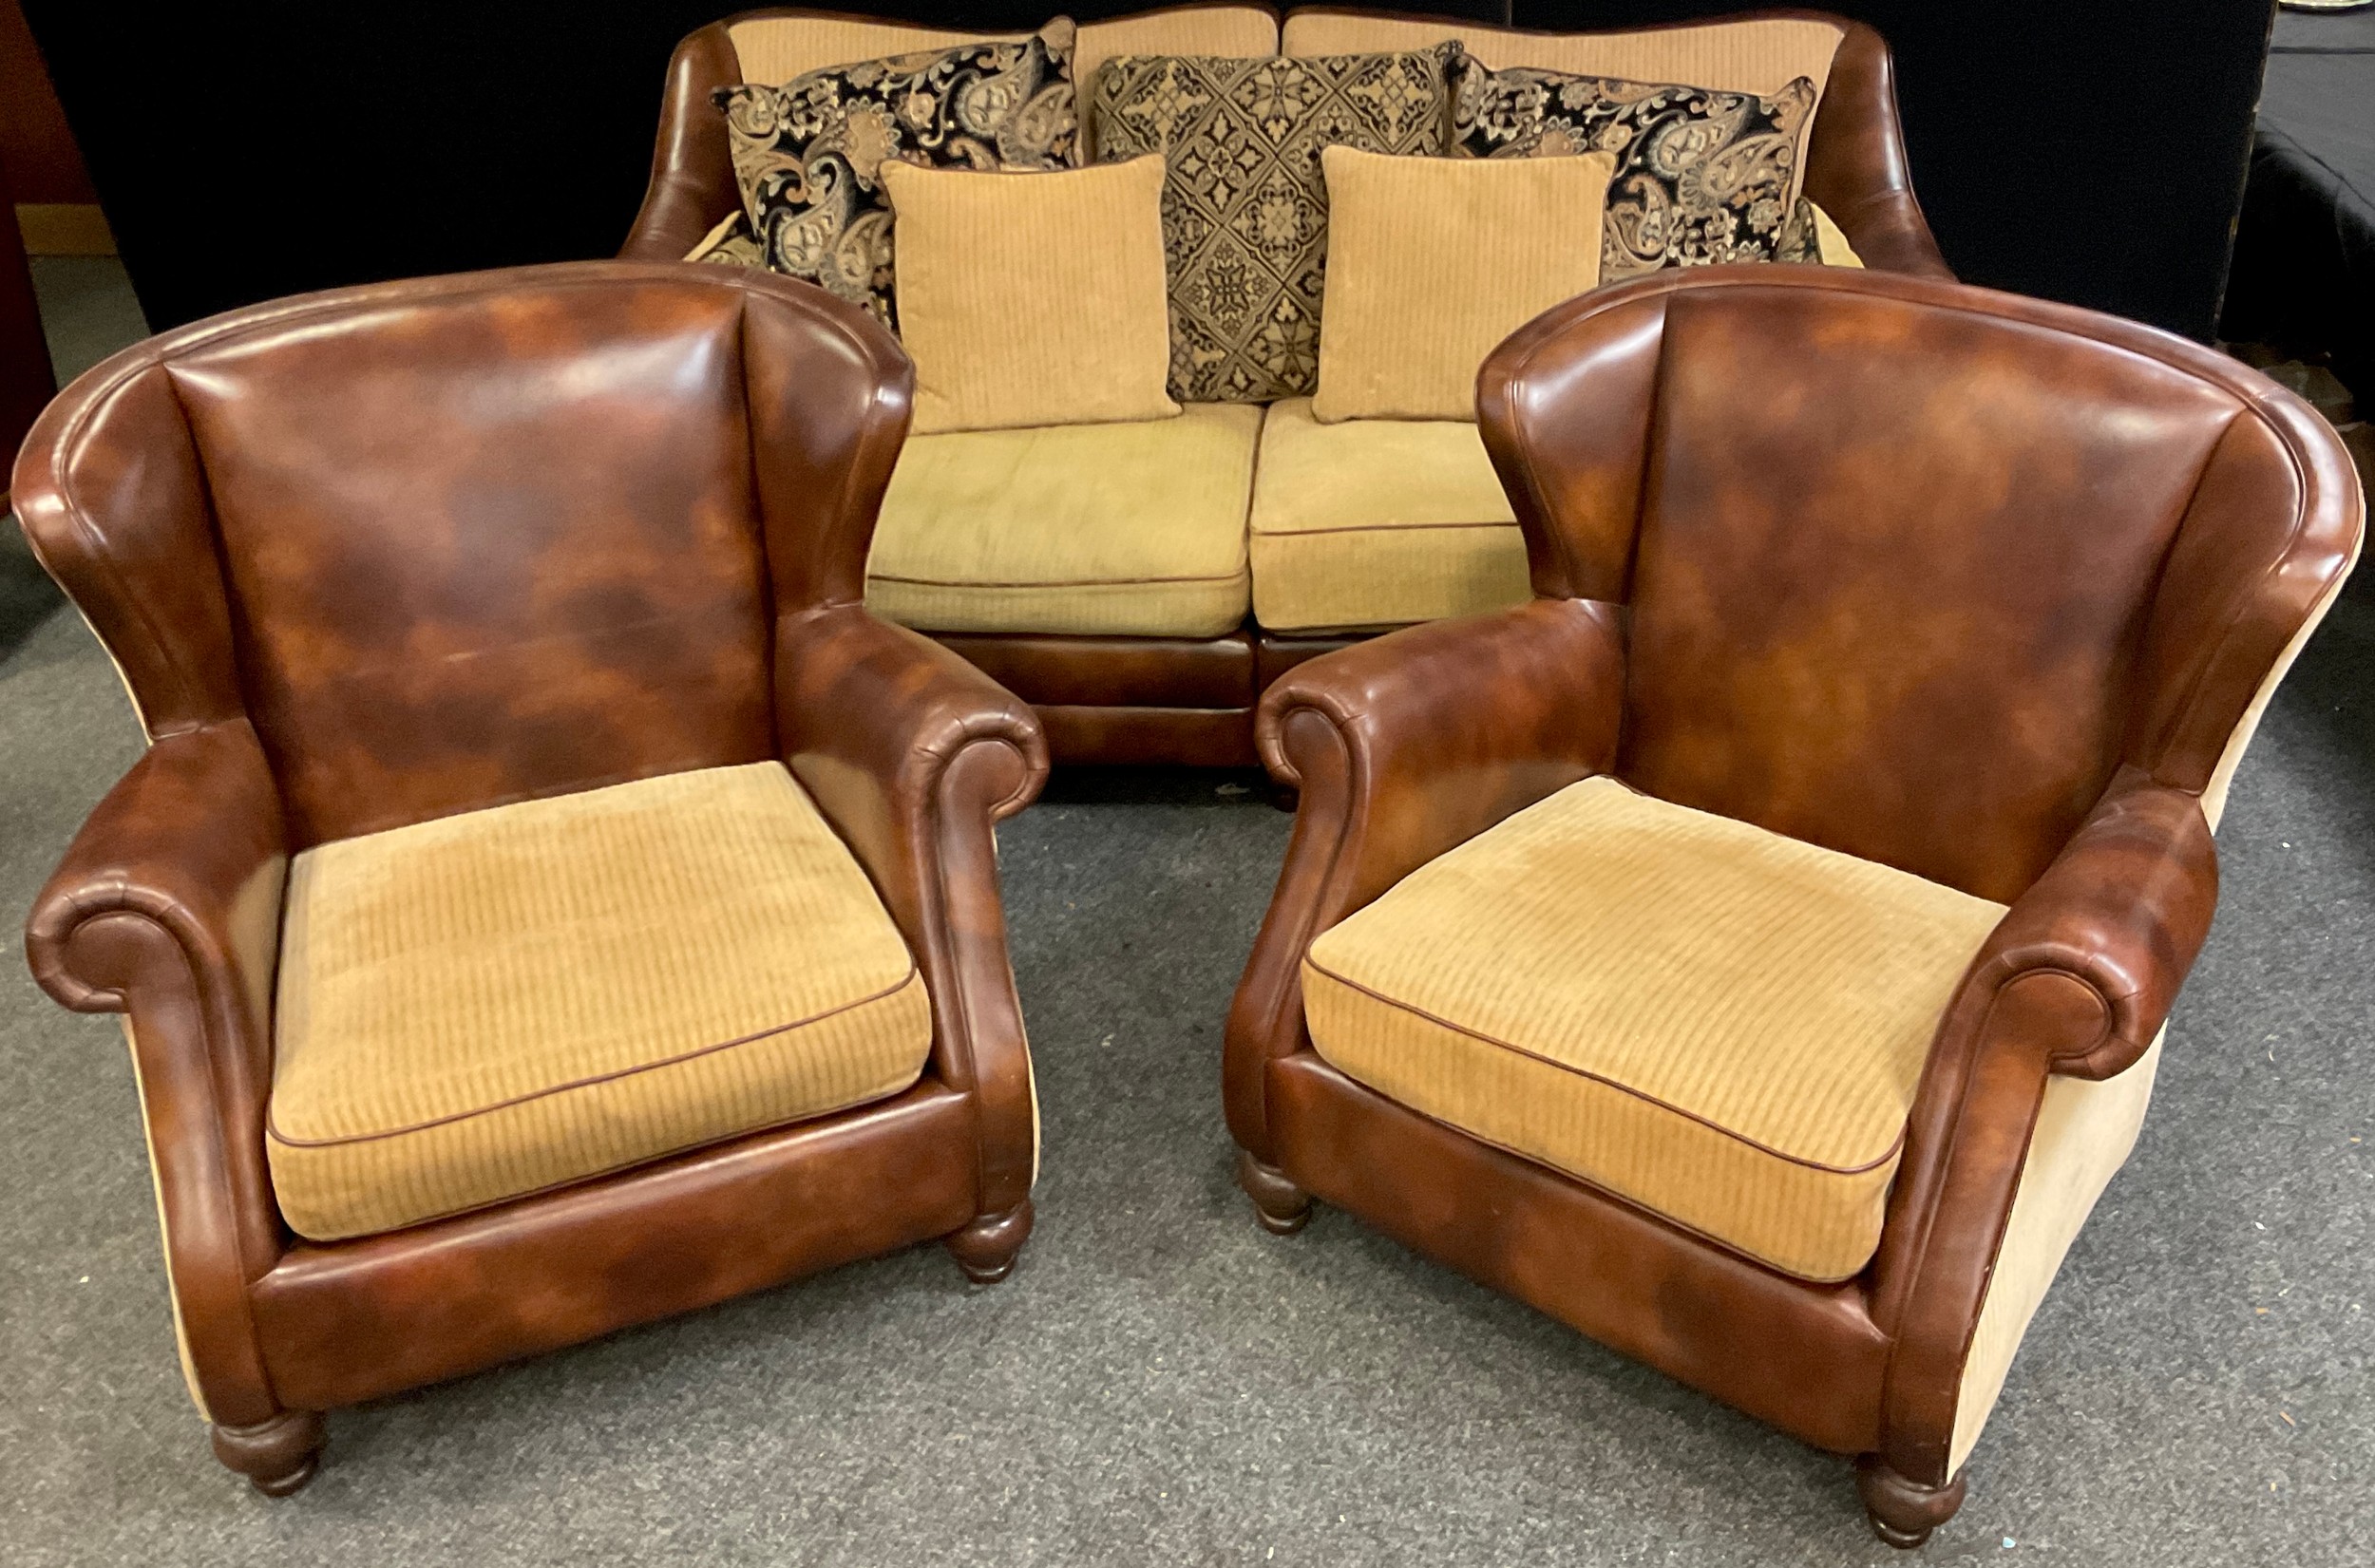 A Contemporary three seat tan leather and fabric sofa, and pair of matching armchairs, sofa